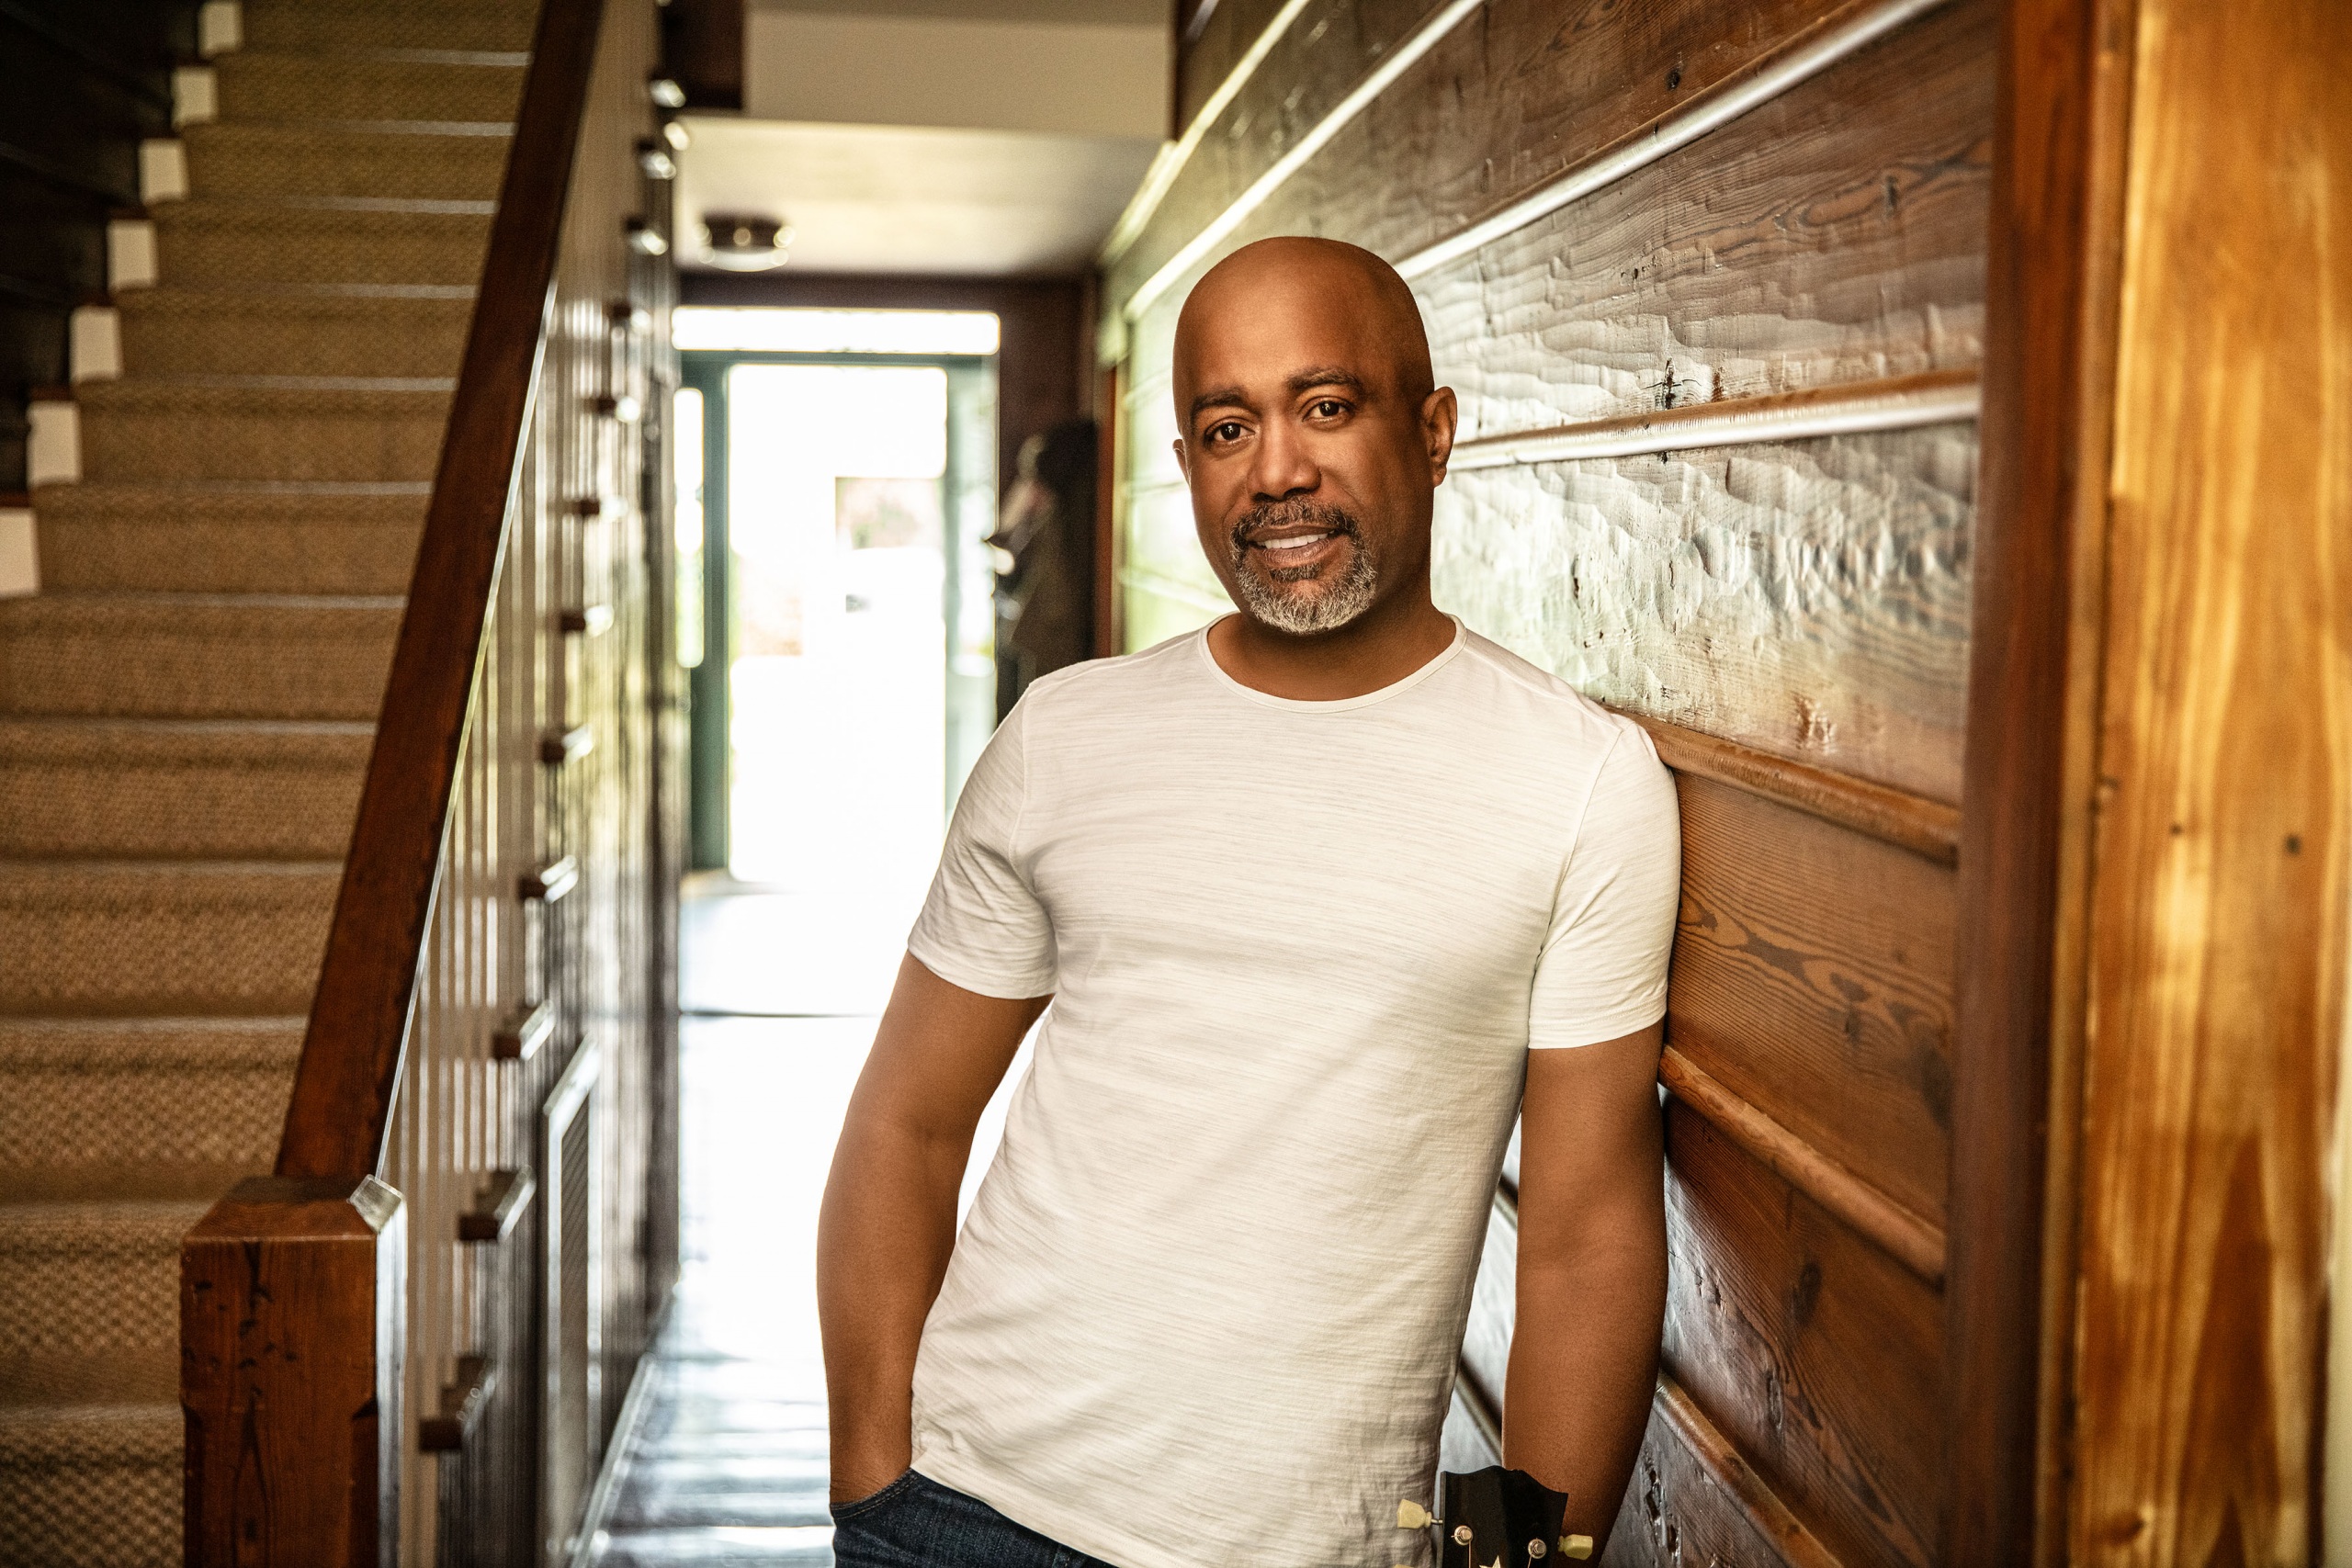 DARIUS RUCKER TO RECEIVE STAR ON THE HOLLYWOOD WALK OF FAME ON DECEMBER 4TH.